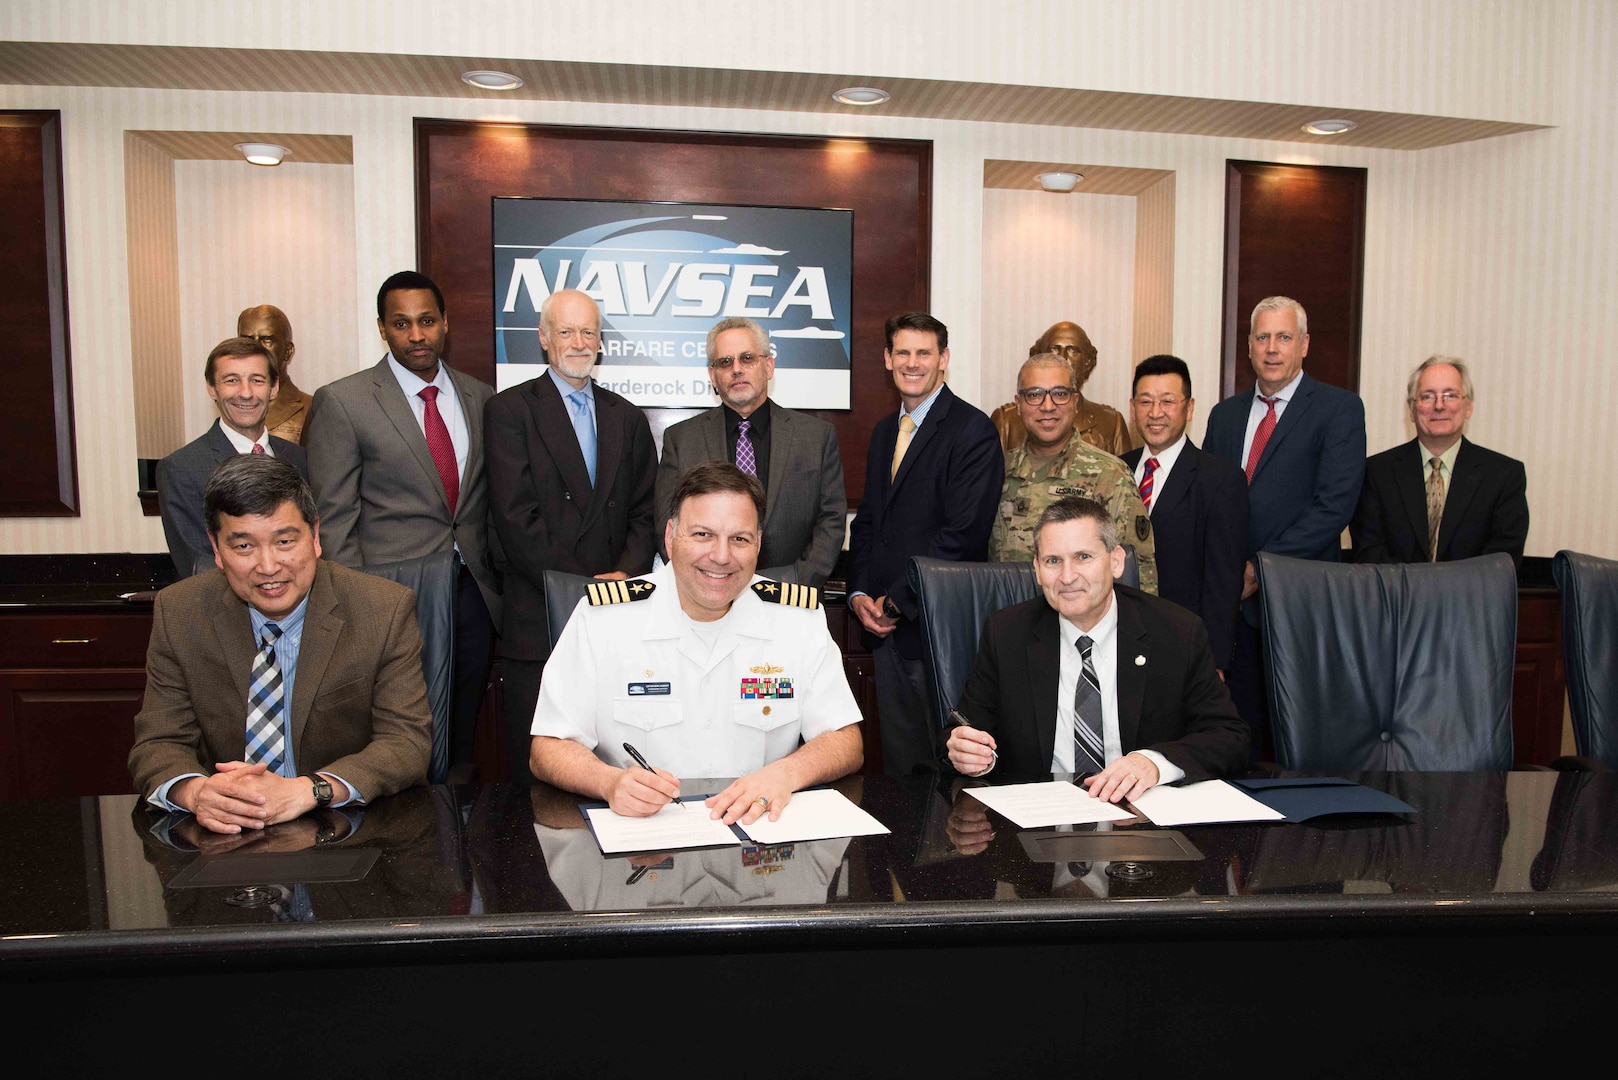 Naval Surface Warfare Center, Carderock Division Commanding Officer Capt. Mark Vandroff (center) and Technical Director (acting) Dr. Paul Shang (left) sign an Education Partnership Agreement with Dr. J. Scott Cameron (right) president of the National Intelligence University, in West Bethesda, Md., June 11, 2018. (Seated from left) Shang, Vandroff and Cameron. (Standing from left) Carderock Marine and Aviation Division Head Steve Ebner (Code 88), Carderock Patent Attorney Dave Ghatt, Carderock Director of Strategic Relations Dr. John Barkyoumb, NIU Professor Dr. Peter Leitner, NIU Dean of the School of Science and Technology Intelligence Dr. Brian Holmes, NIU faculty member MSG Angel Morales, Carderock Electrical Engineer Dr. Peter Cho (Code 88), Department Head Naval Architecture and Engineering Mike Brown and Carderock Director of Technology Transfer Dr. Joseph Teter (Code 00T). (U.S. Navy photo by Nicholas Brezzell/Released)